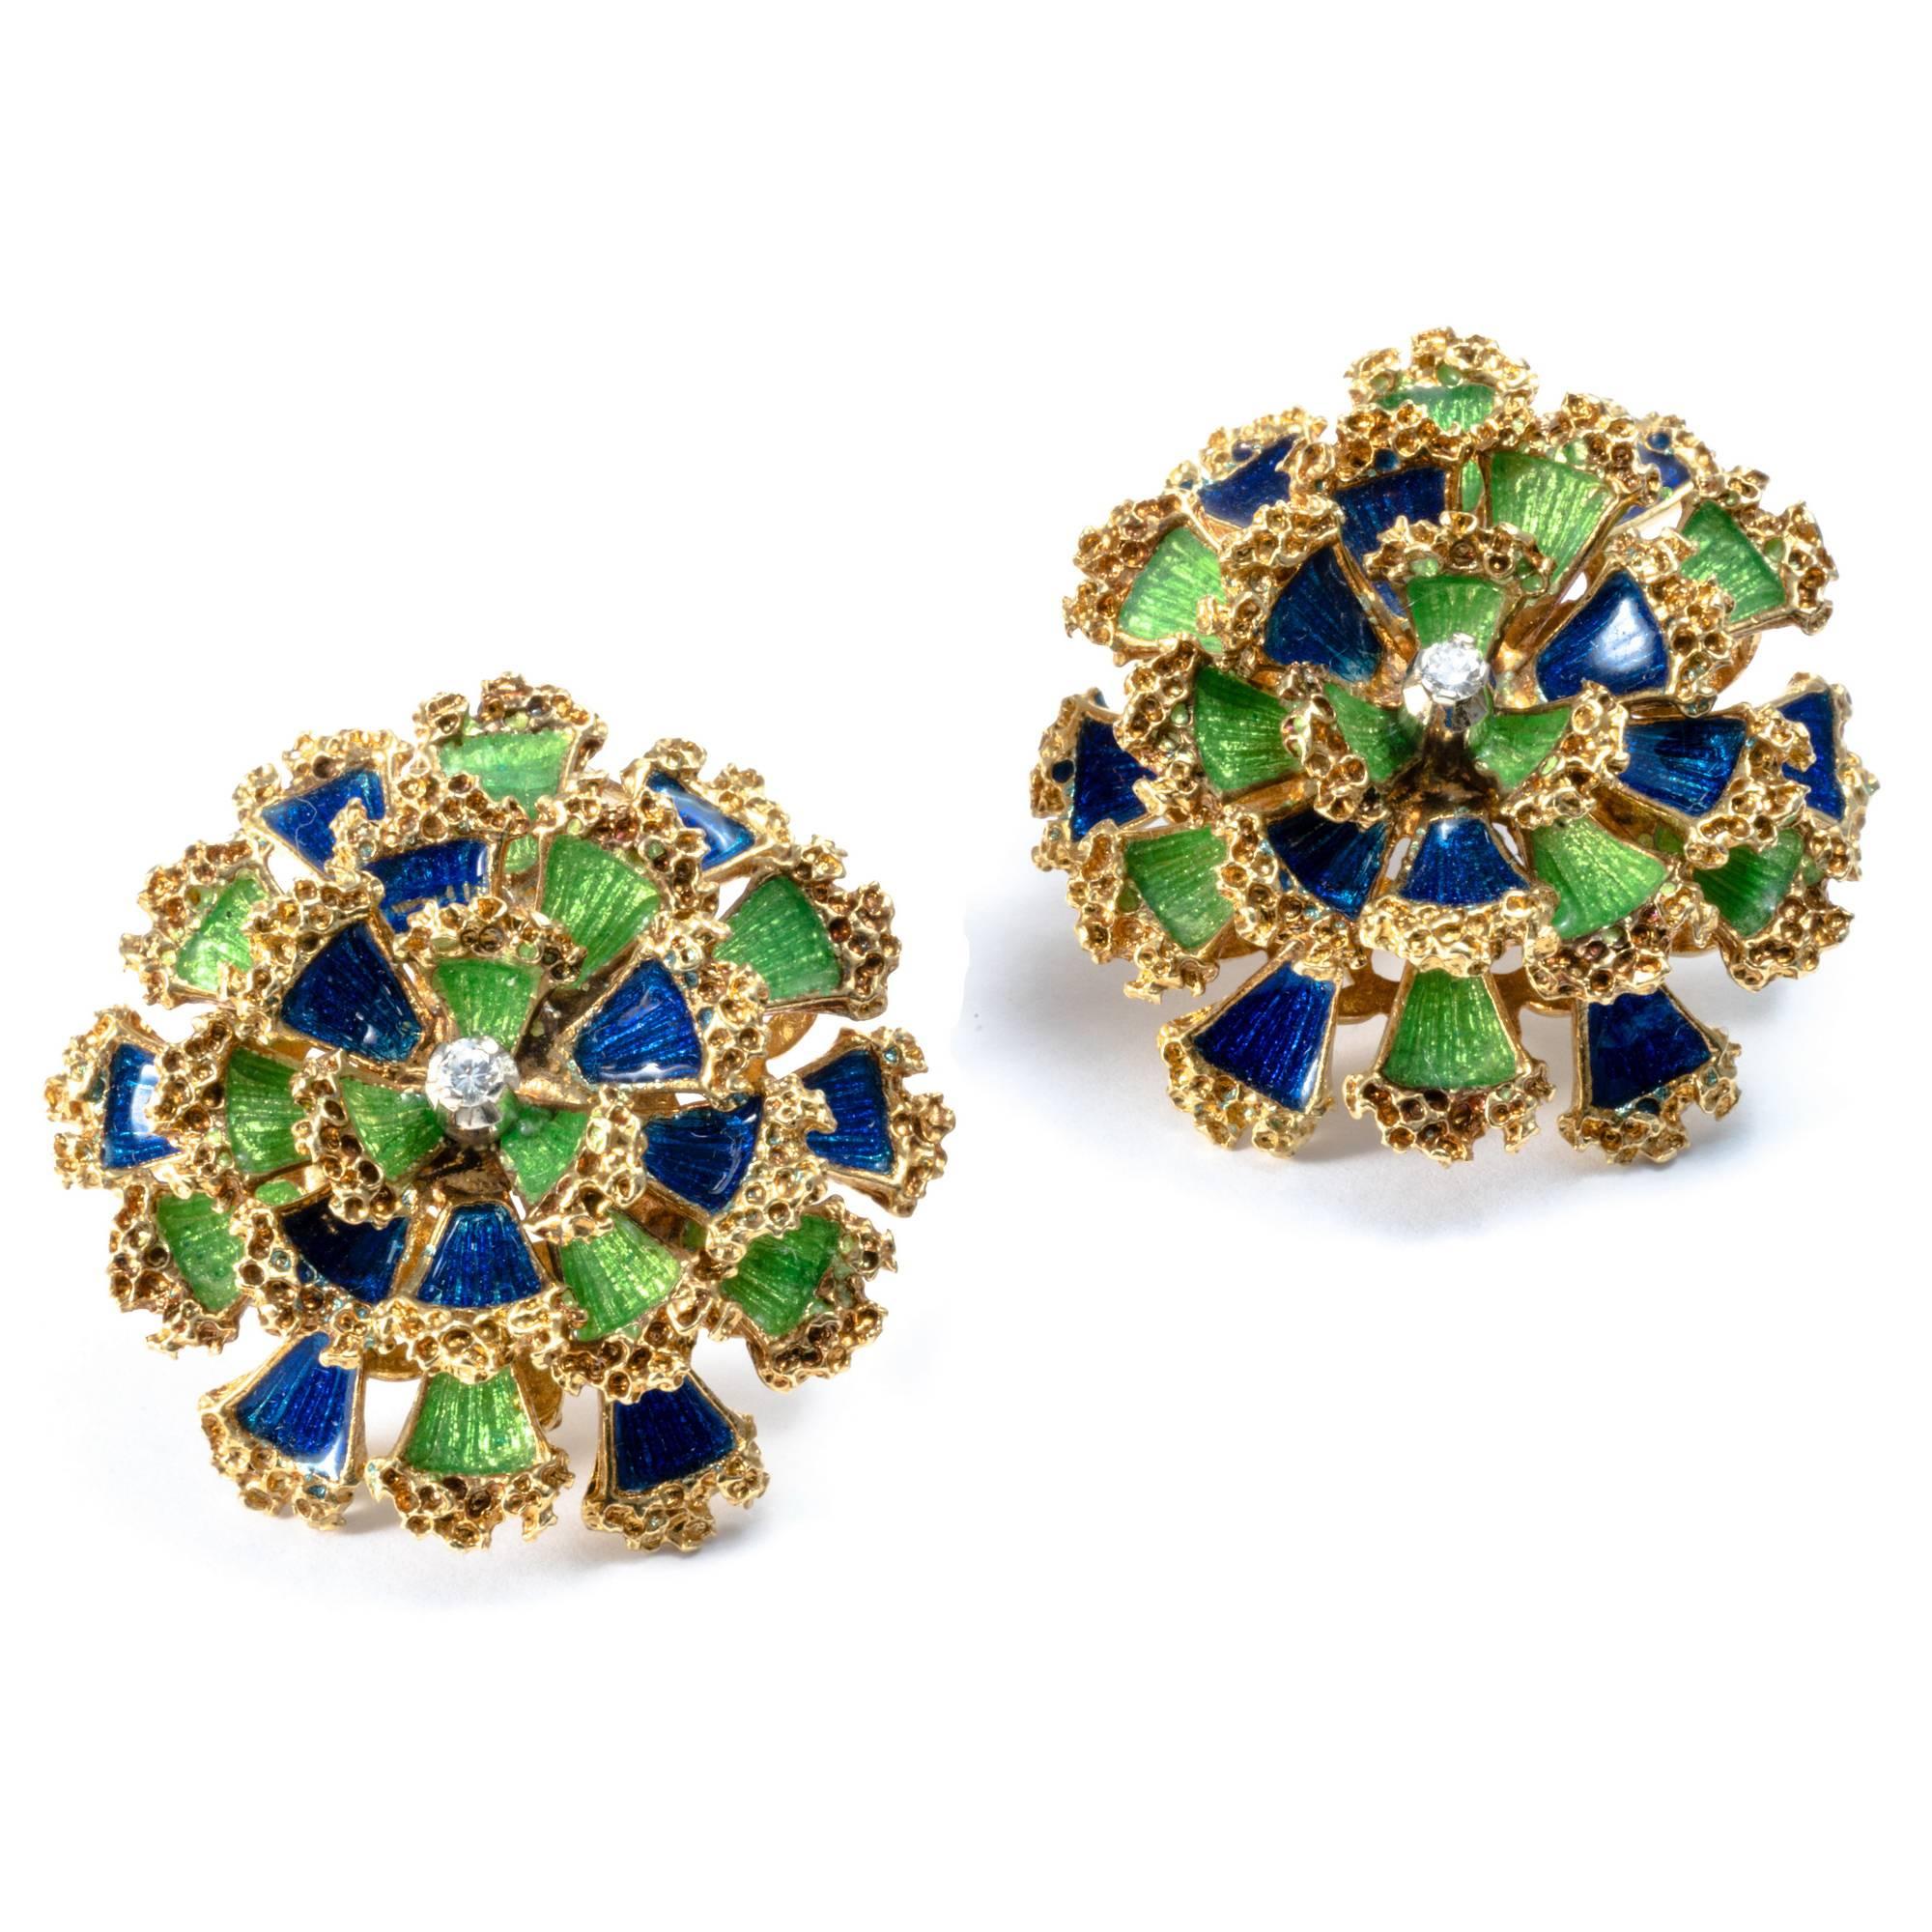 These yellow gold 1950's dome floral earrings are lively and appealing with their bright blu and green enameled petals, enlightened by 2 diamonds. 